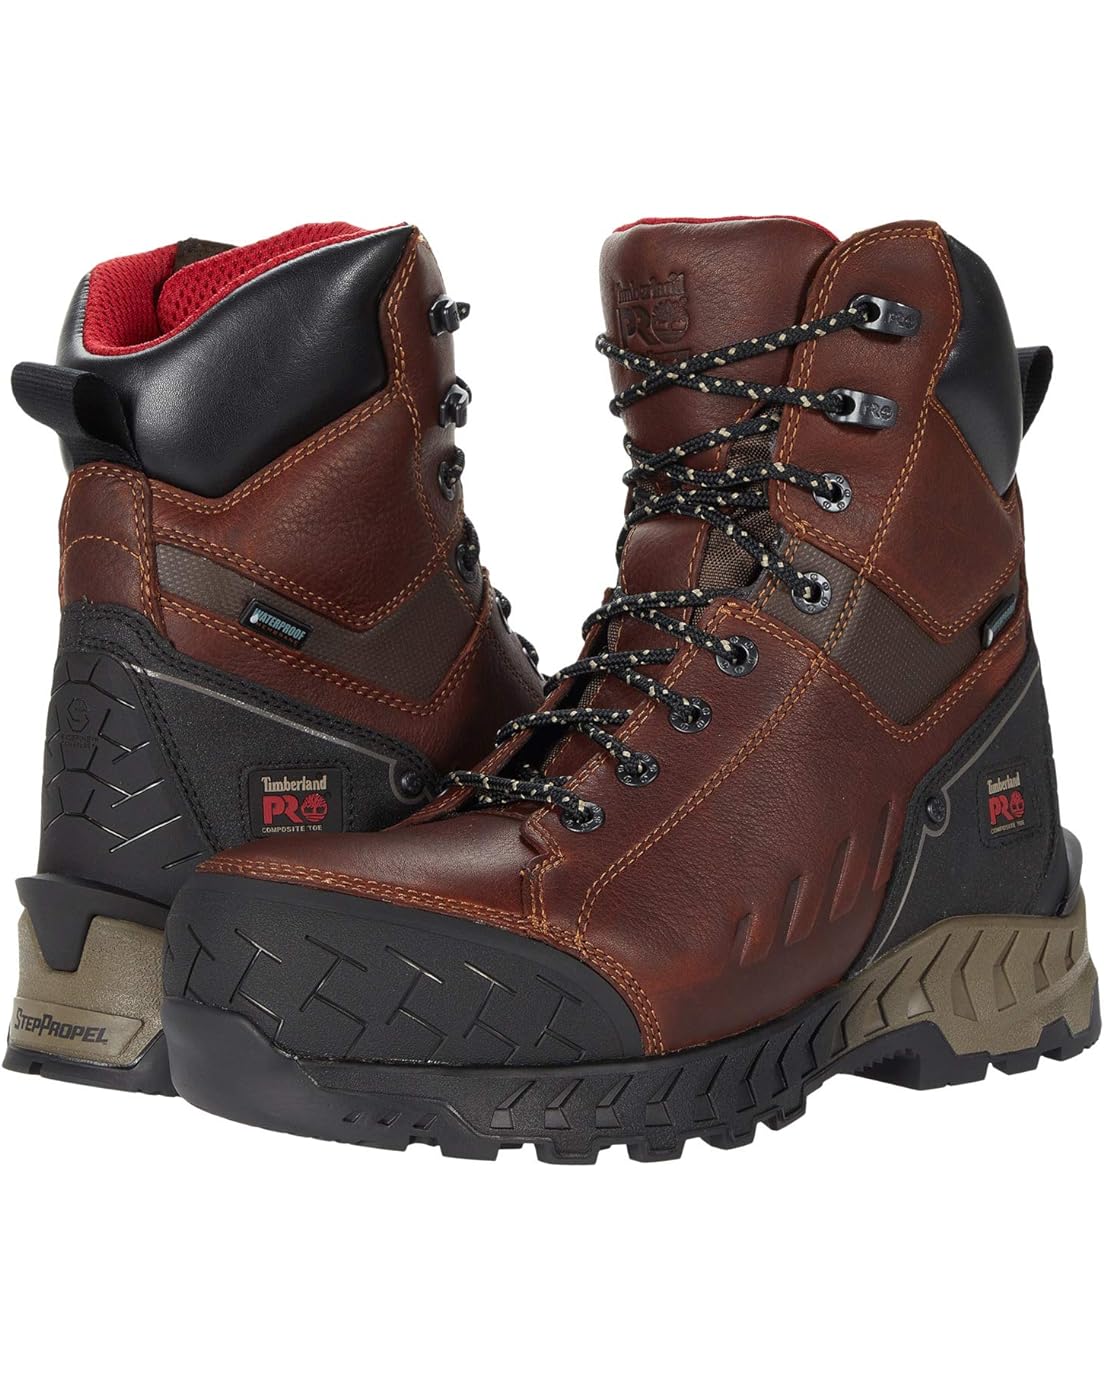 Timberland PRO Work Summit 8 Composite Safety Toe Waterproof Insulated